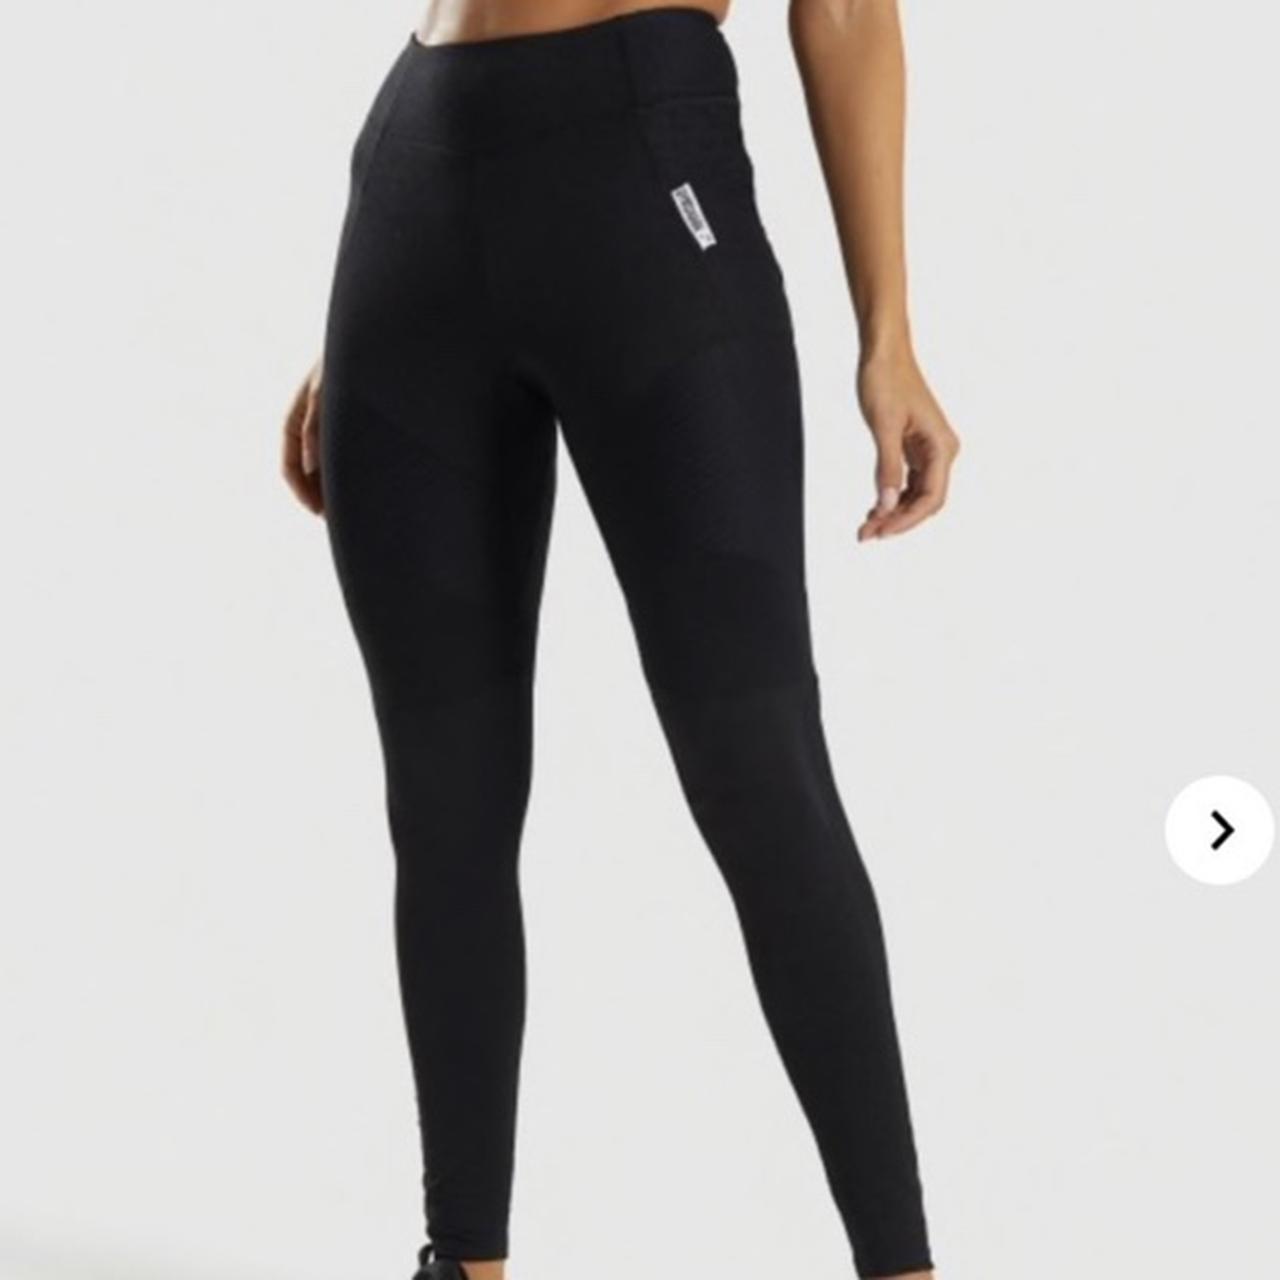 Gymshark leggings size M. New with tags